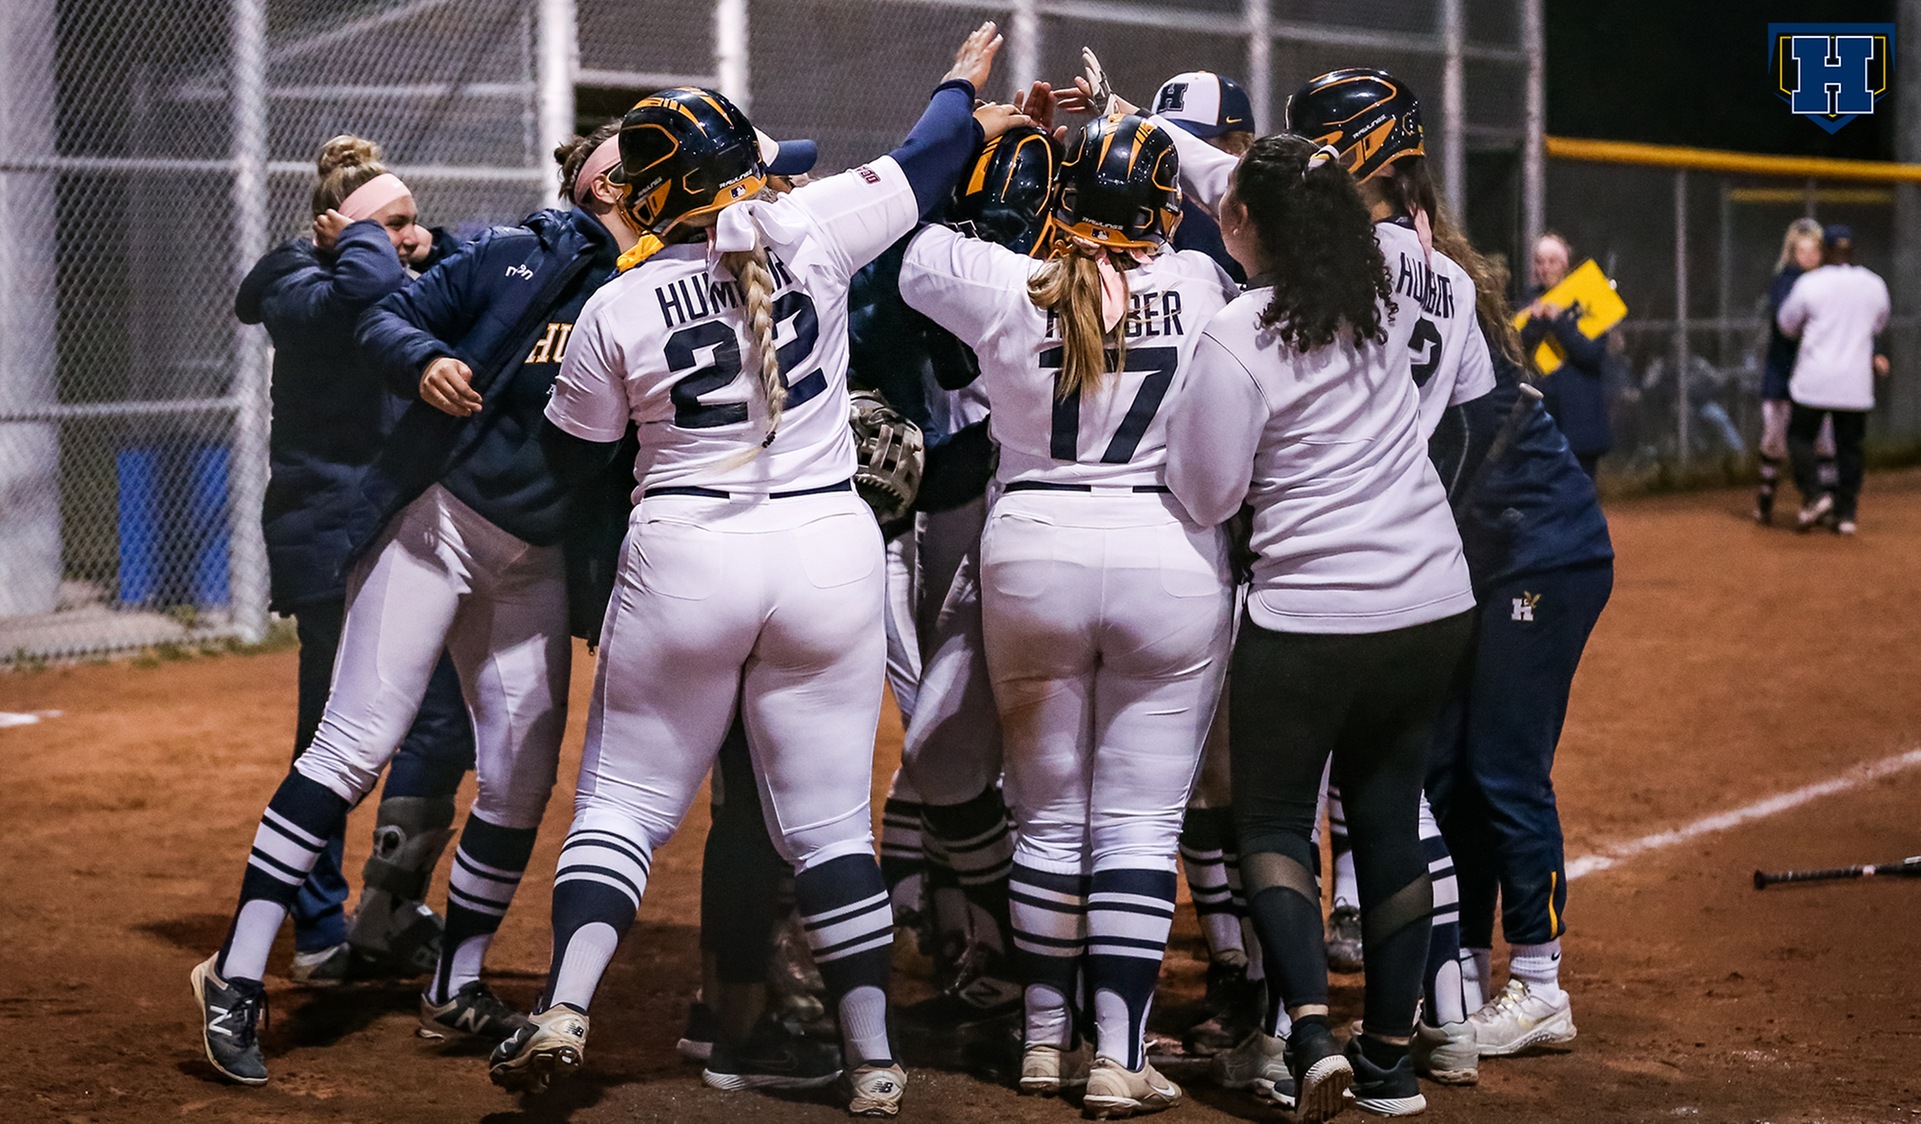 Softball Clinches Regular Season Title for the First Time in Program History